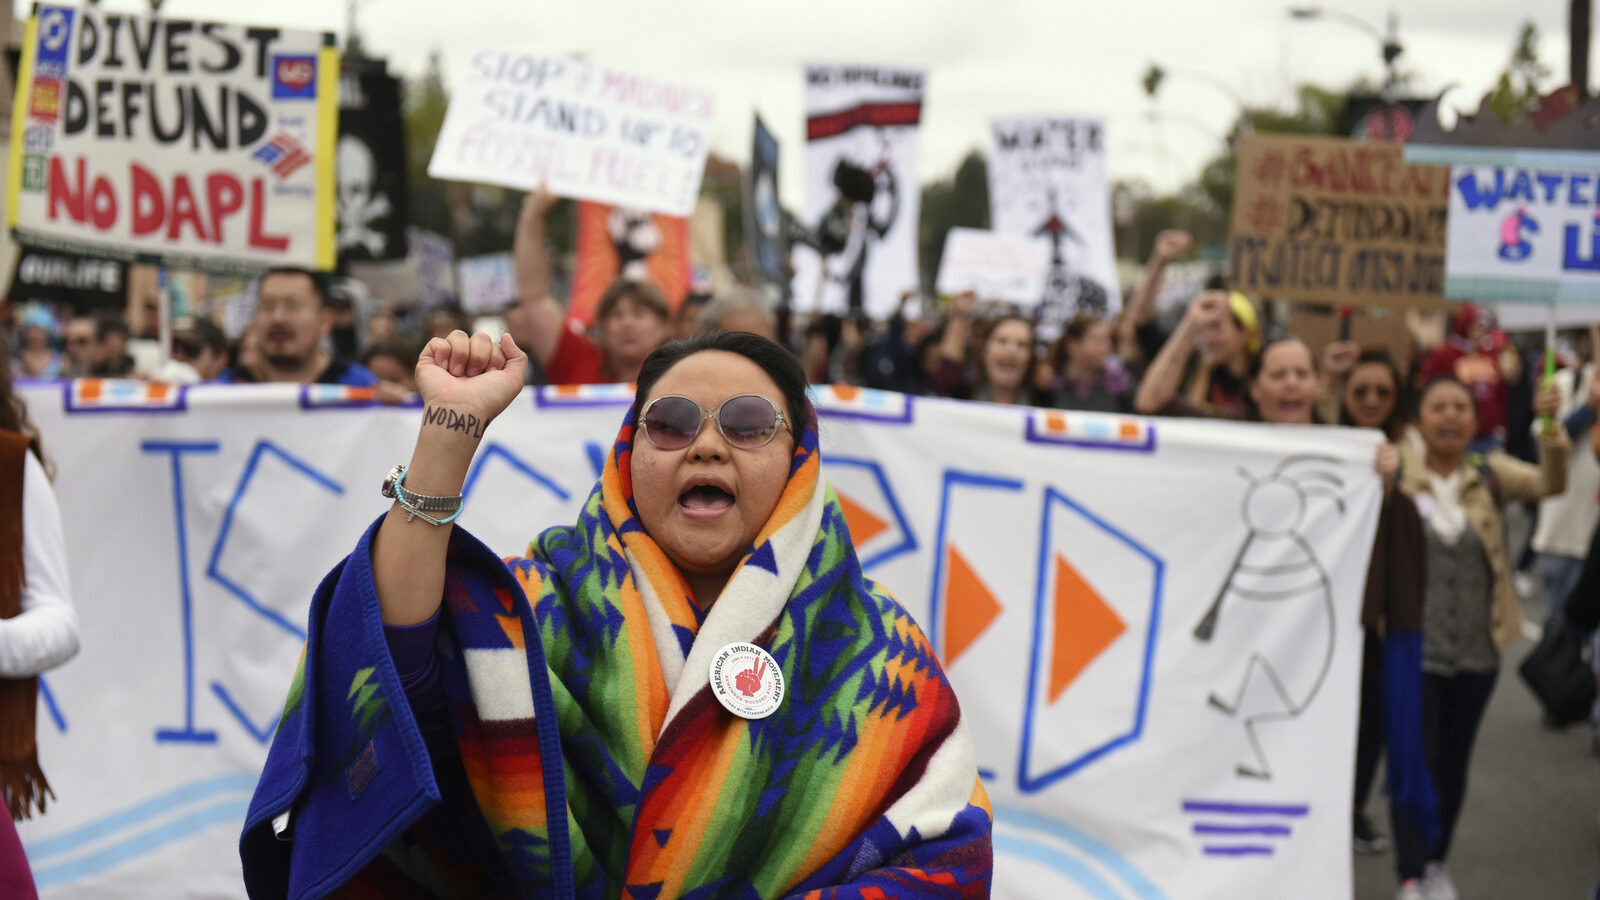 Protesters rally against the Dakota Access Pipeline during the 128th Rose Parade in Pasadena, Calif., Monday, Jan. 2, 2017. (AP Photo/Michael Owen Baker)